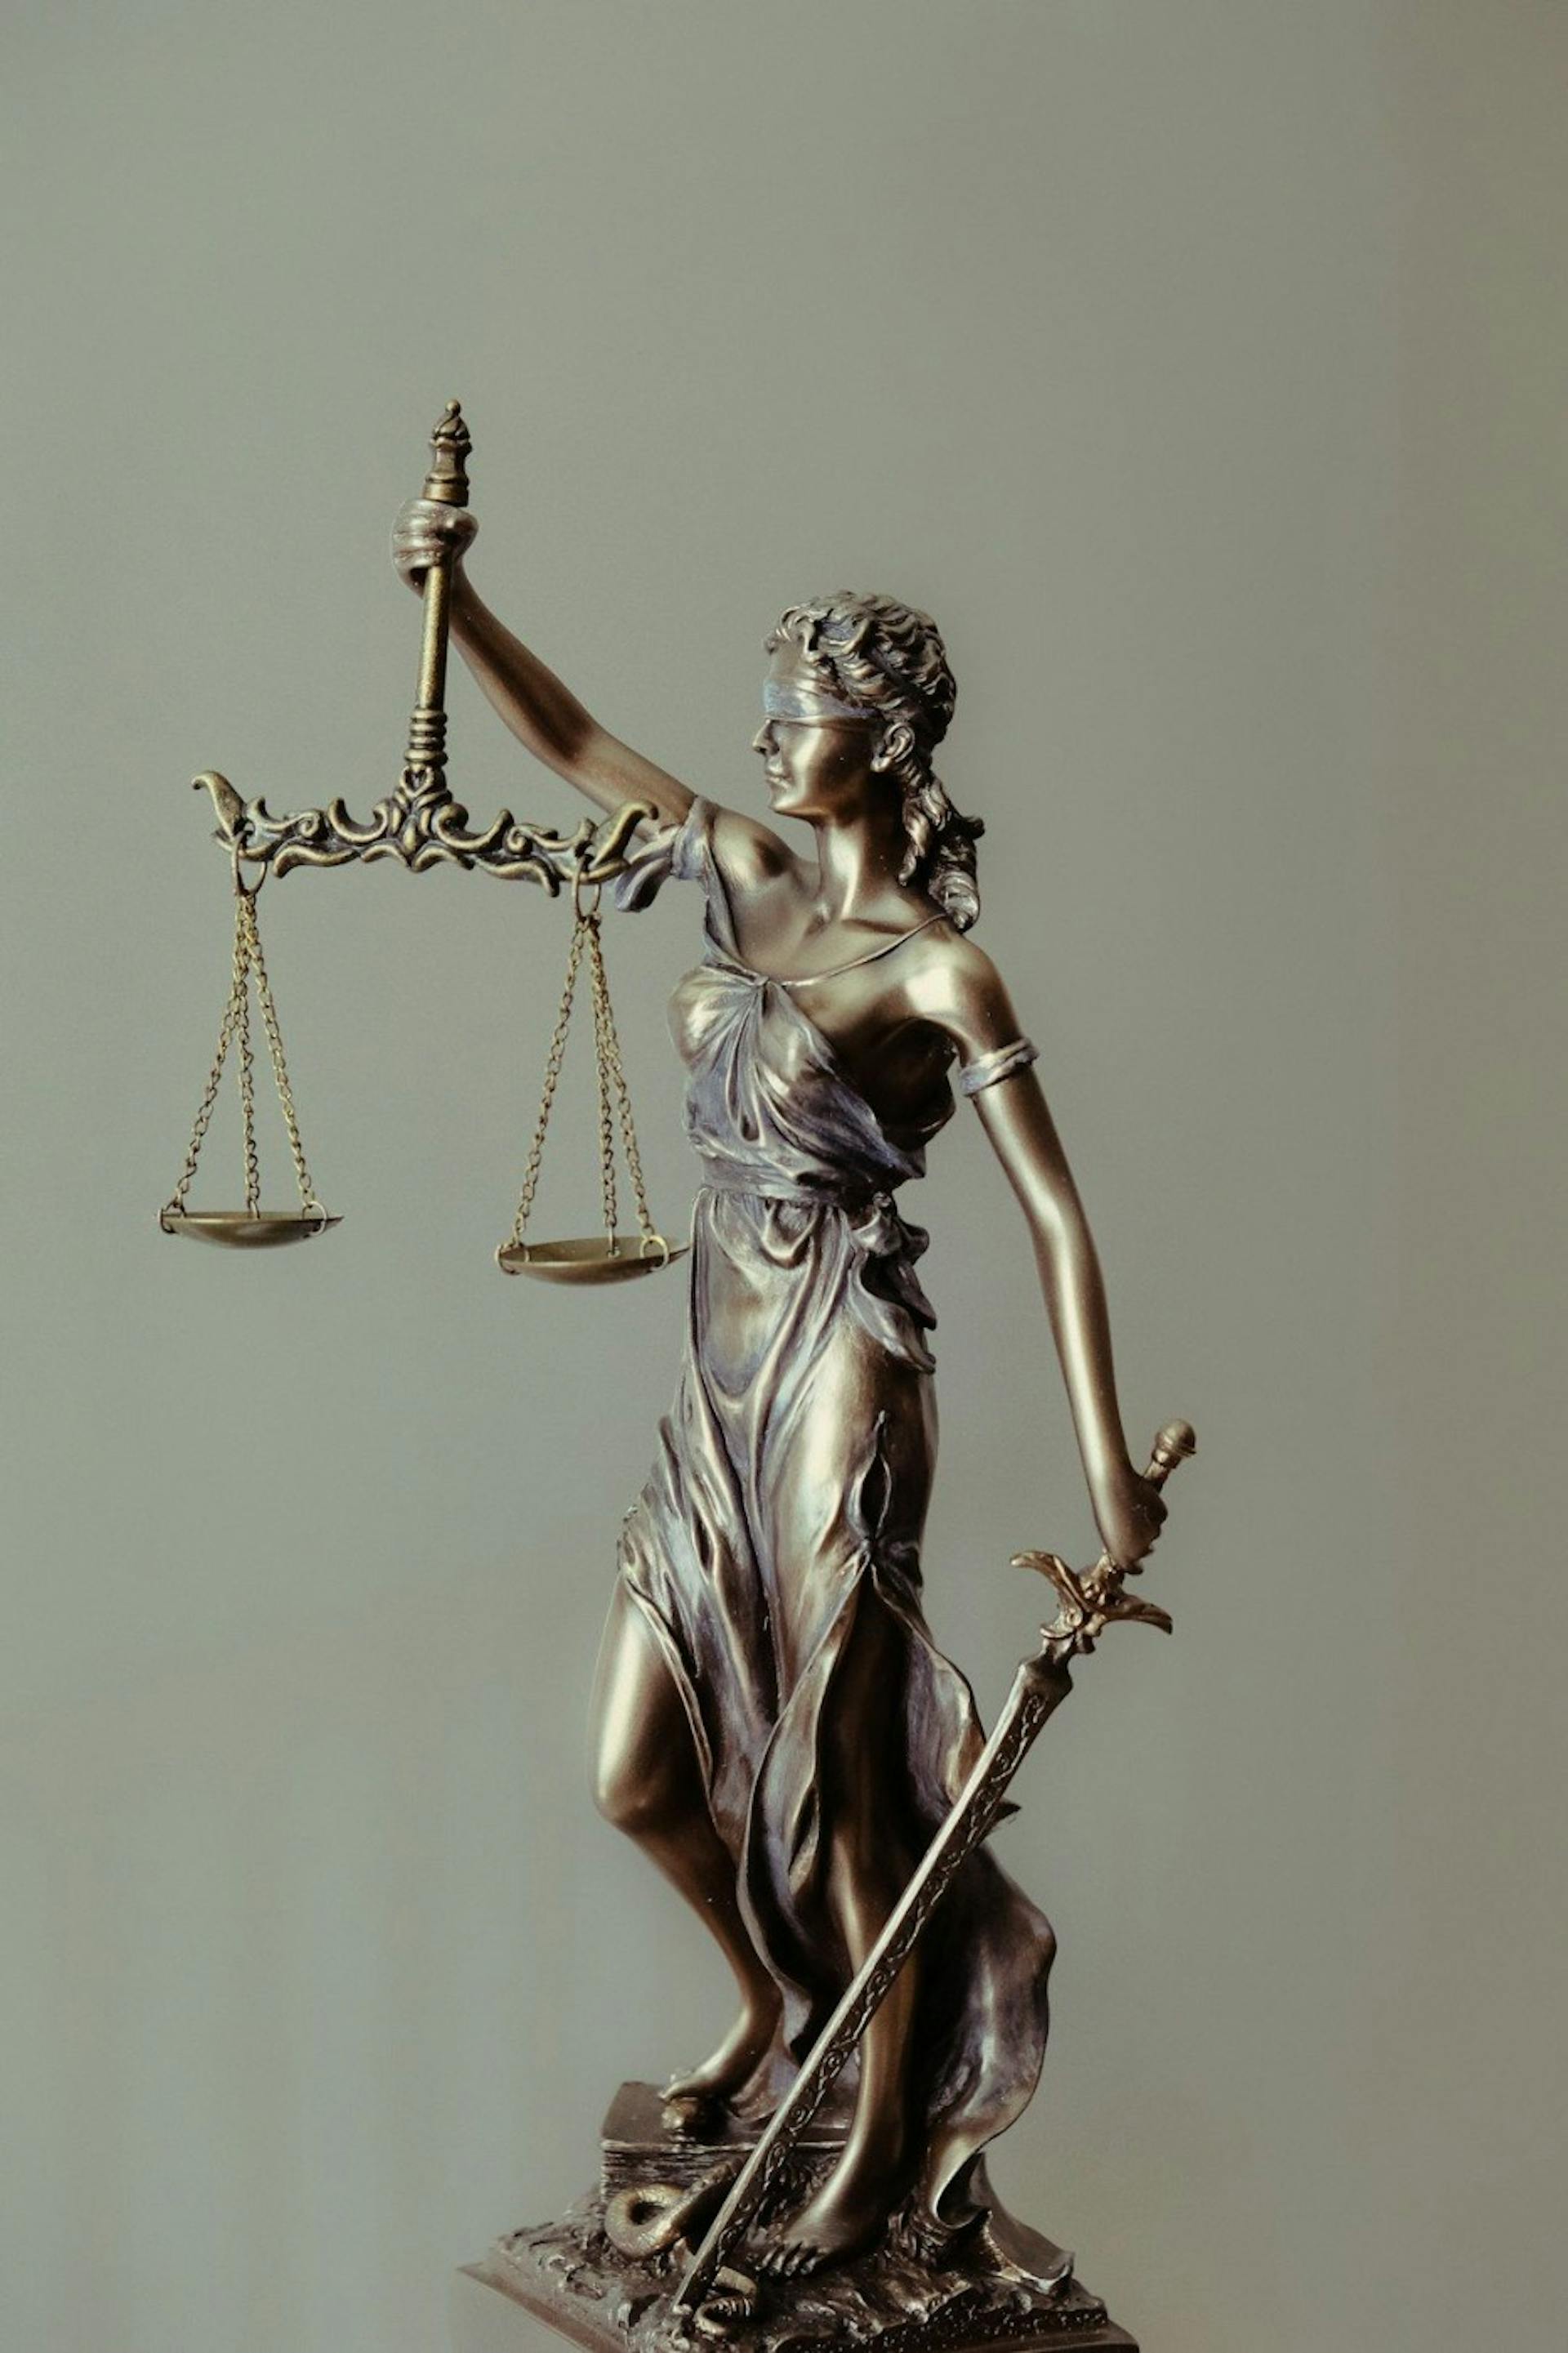 Image of Justice by Tingey Injury Law from Unsplash